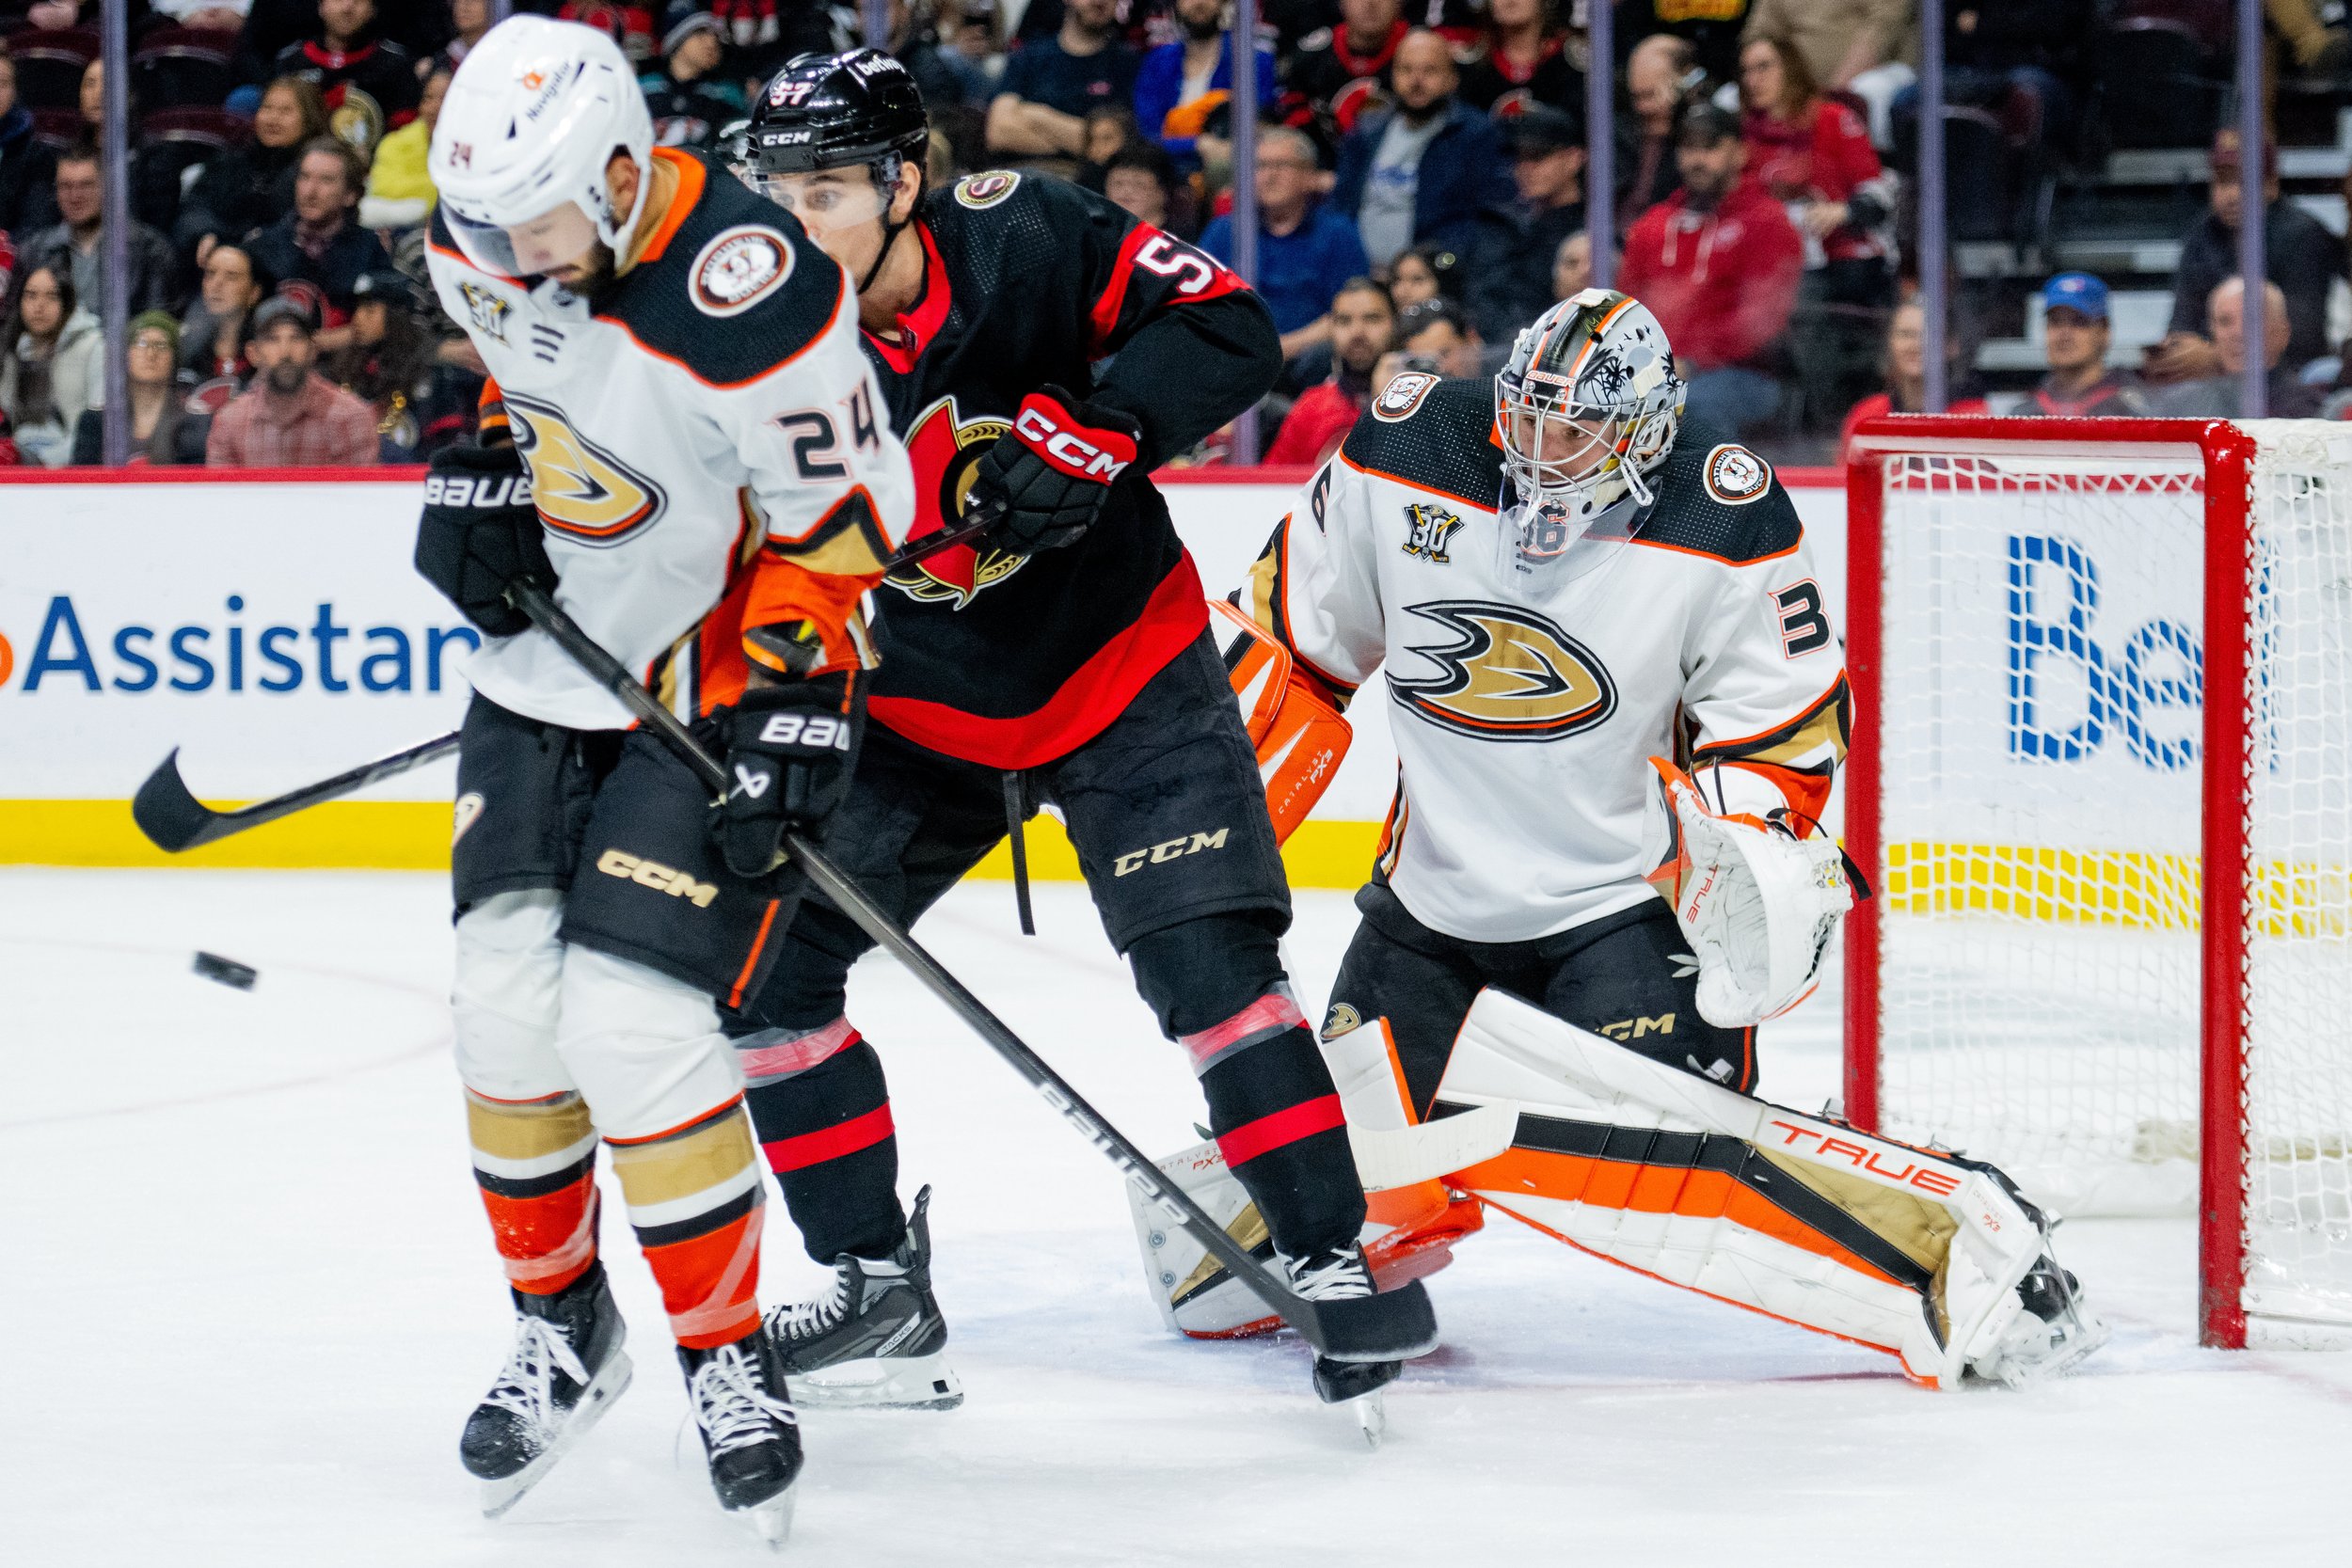  Anaheim Ducks goaltender John Gibson (36) searches for the puck as Ottawa Senators centre Shane Pinto (57) and Anaheim Ducks centre Bo Groulx (24) fight for control during the first period of regular season NHL hockey action in Ottawa, on Thursday, 